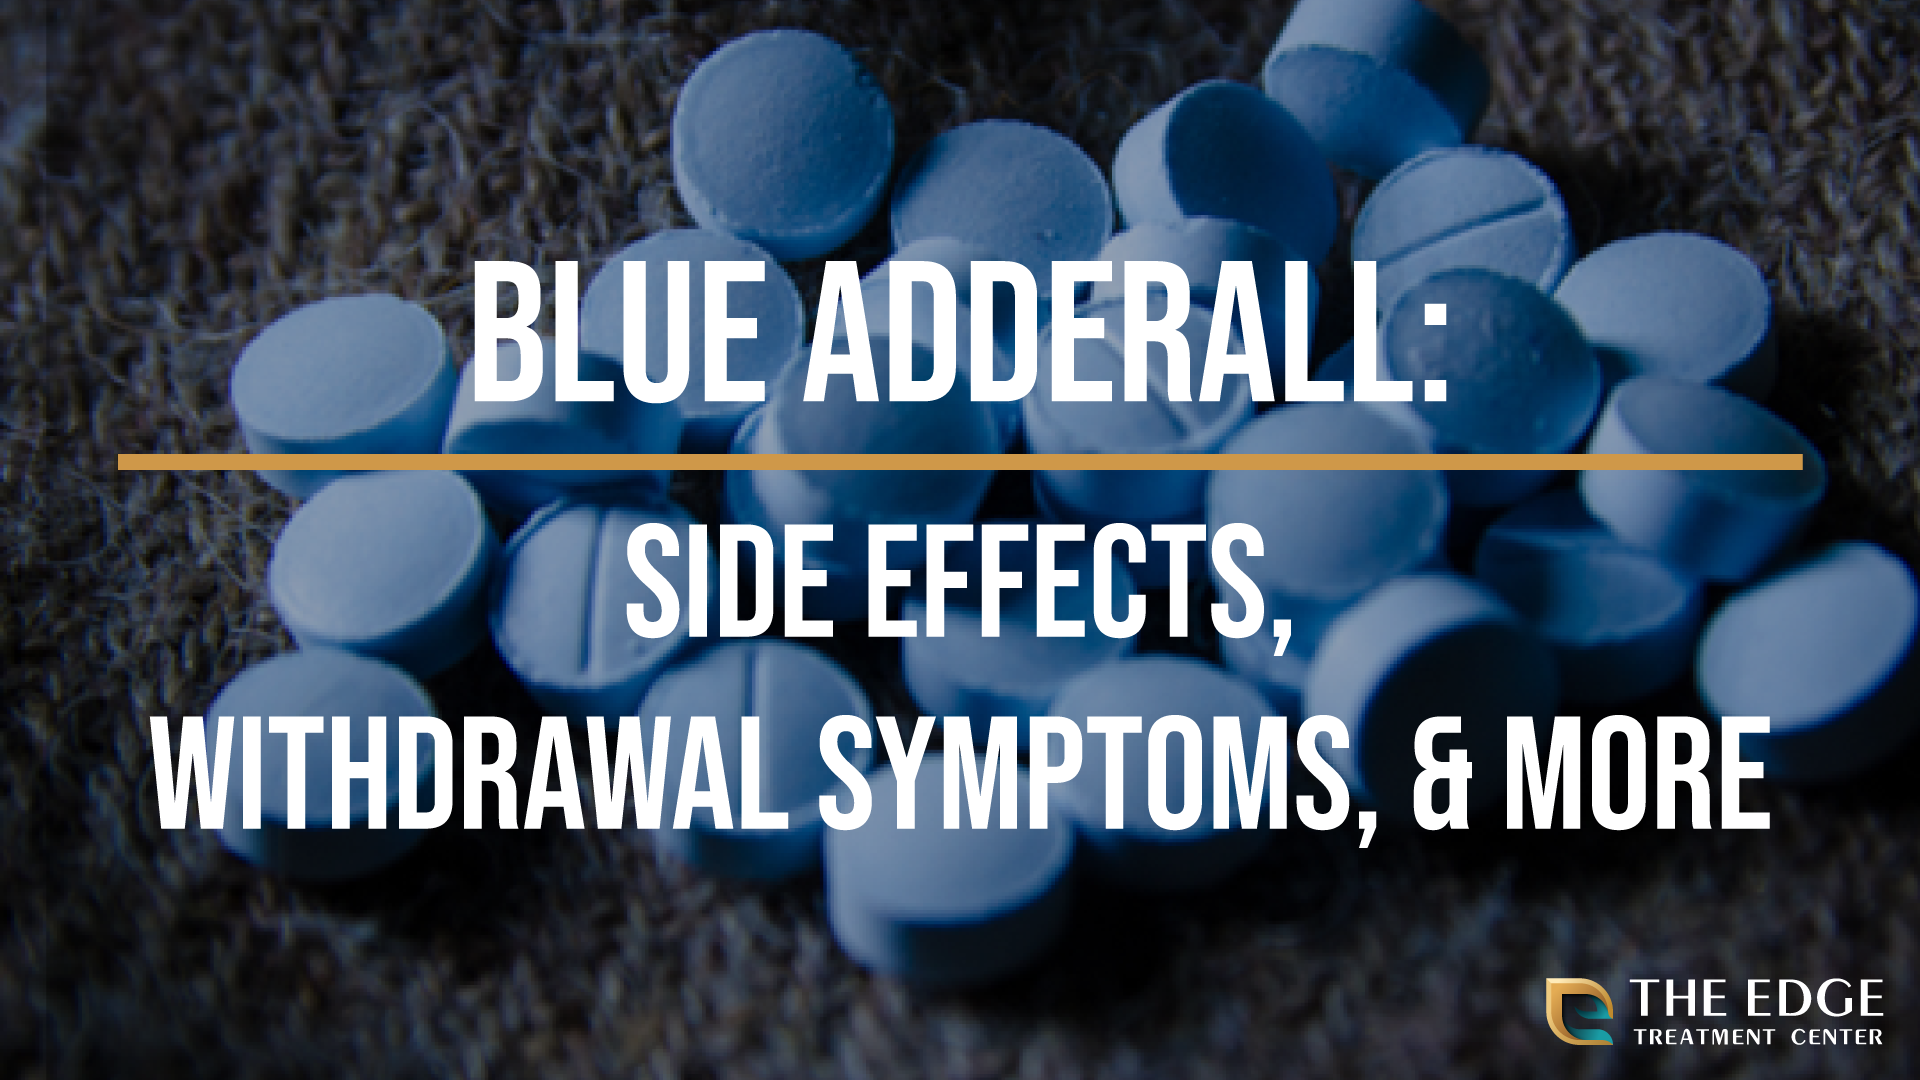 Modafinil Vs Adderall: Which Improves Performance Better?